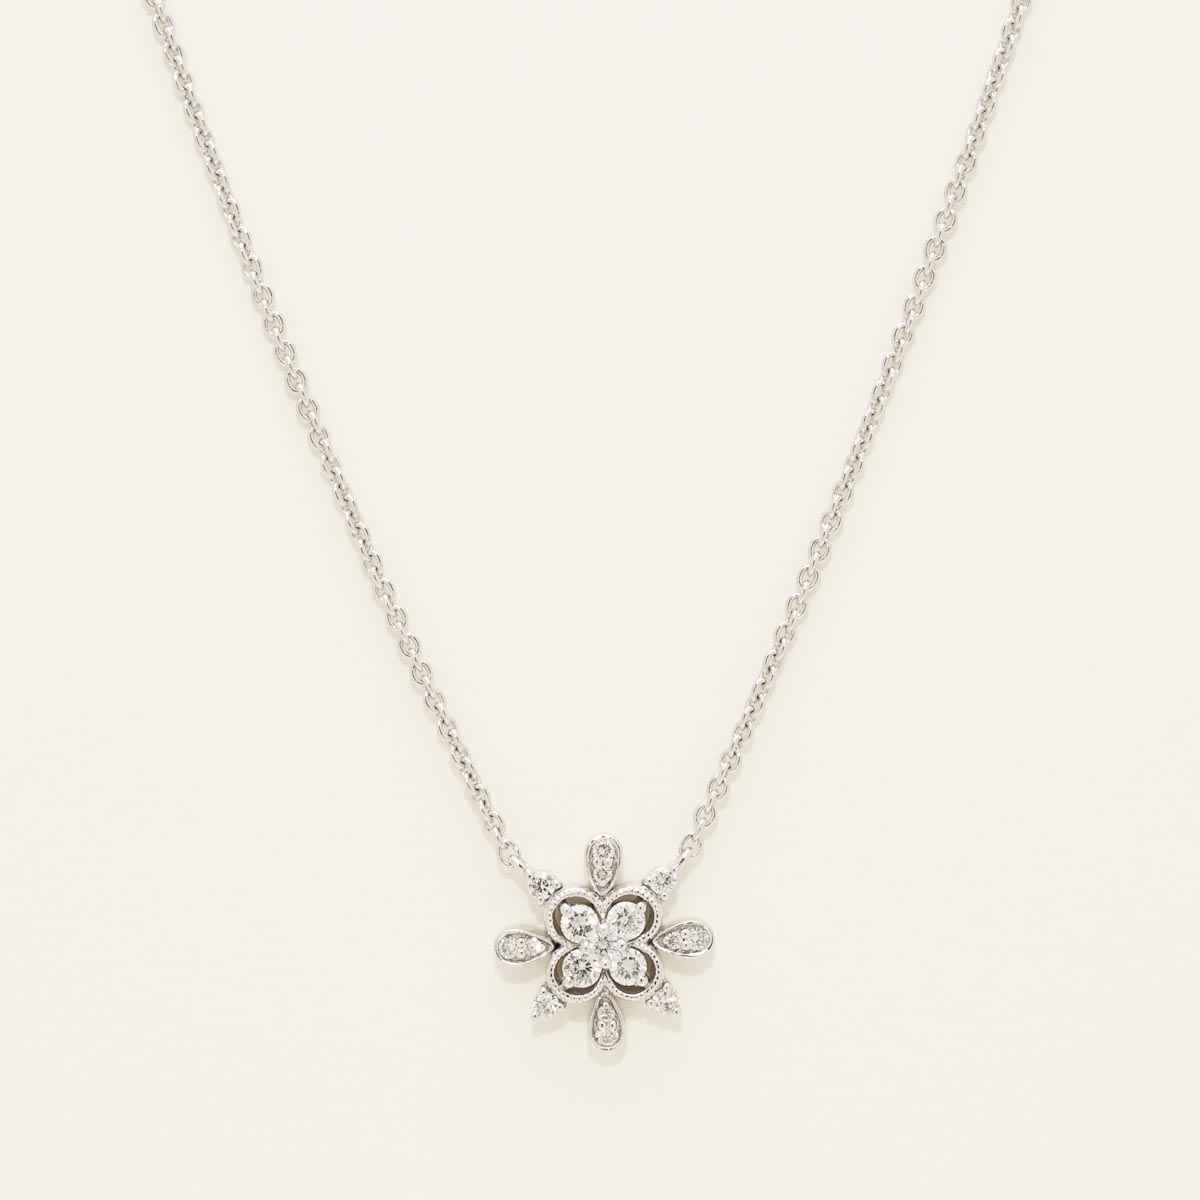 Diamond Fashion Necklace in 14kt White Gold (1/4ct tw)